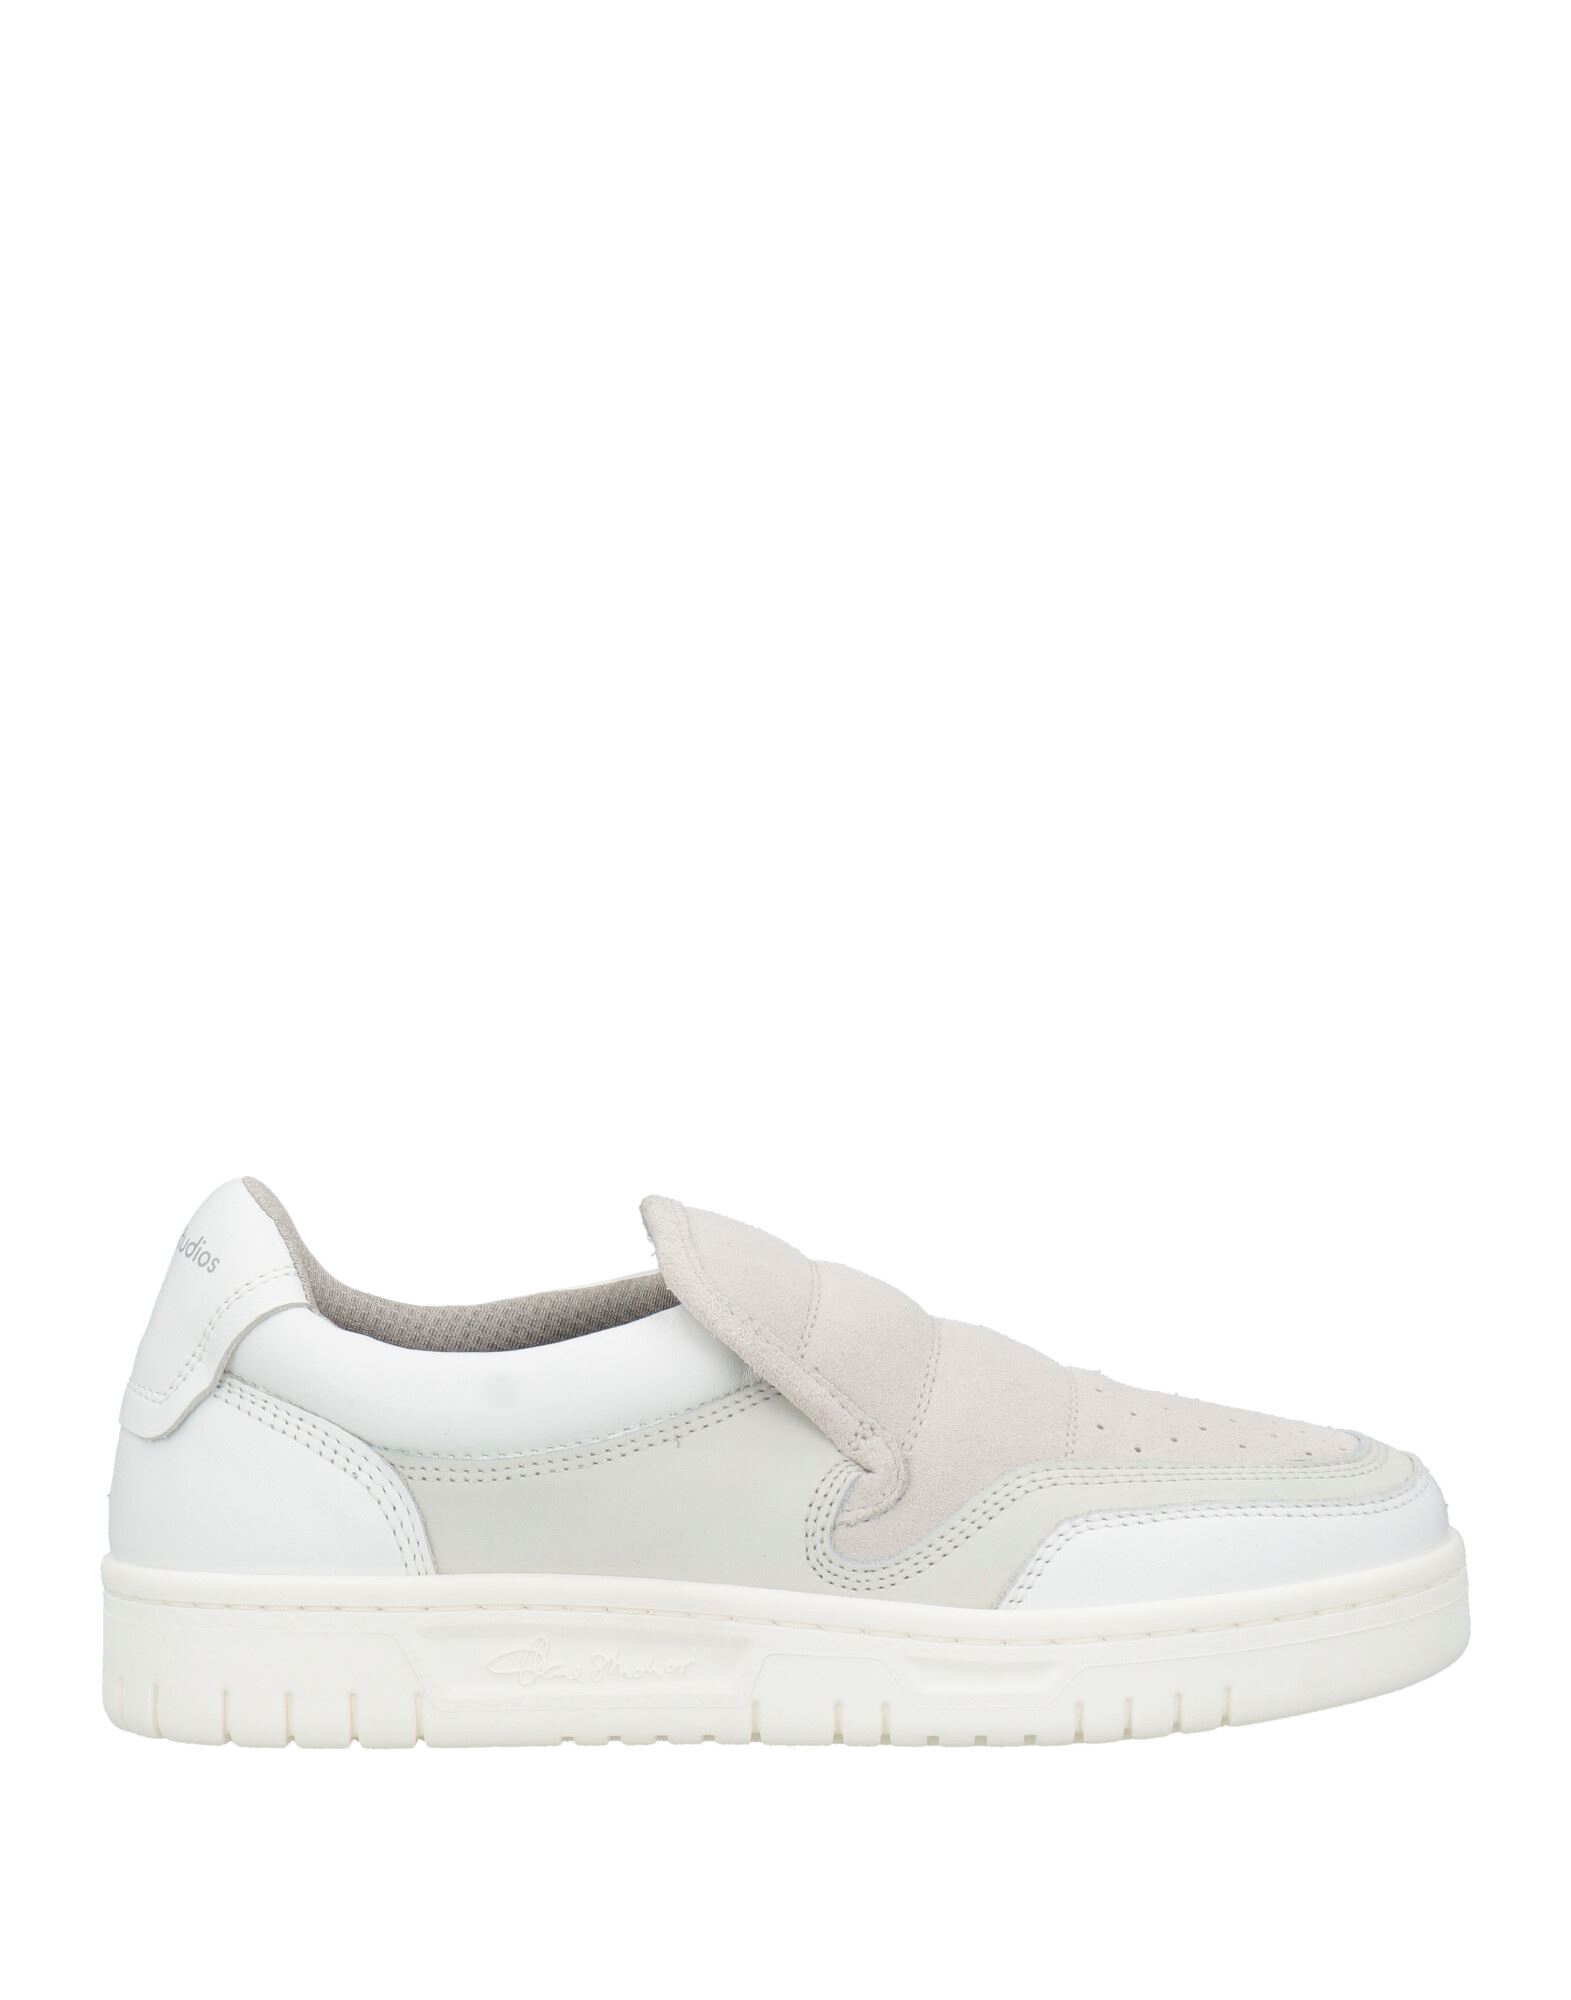 Shop Acne Studios Woman Sneakers Light Grey Size 6 Soft Leather